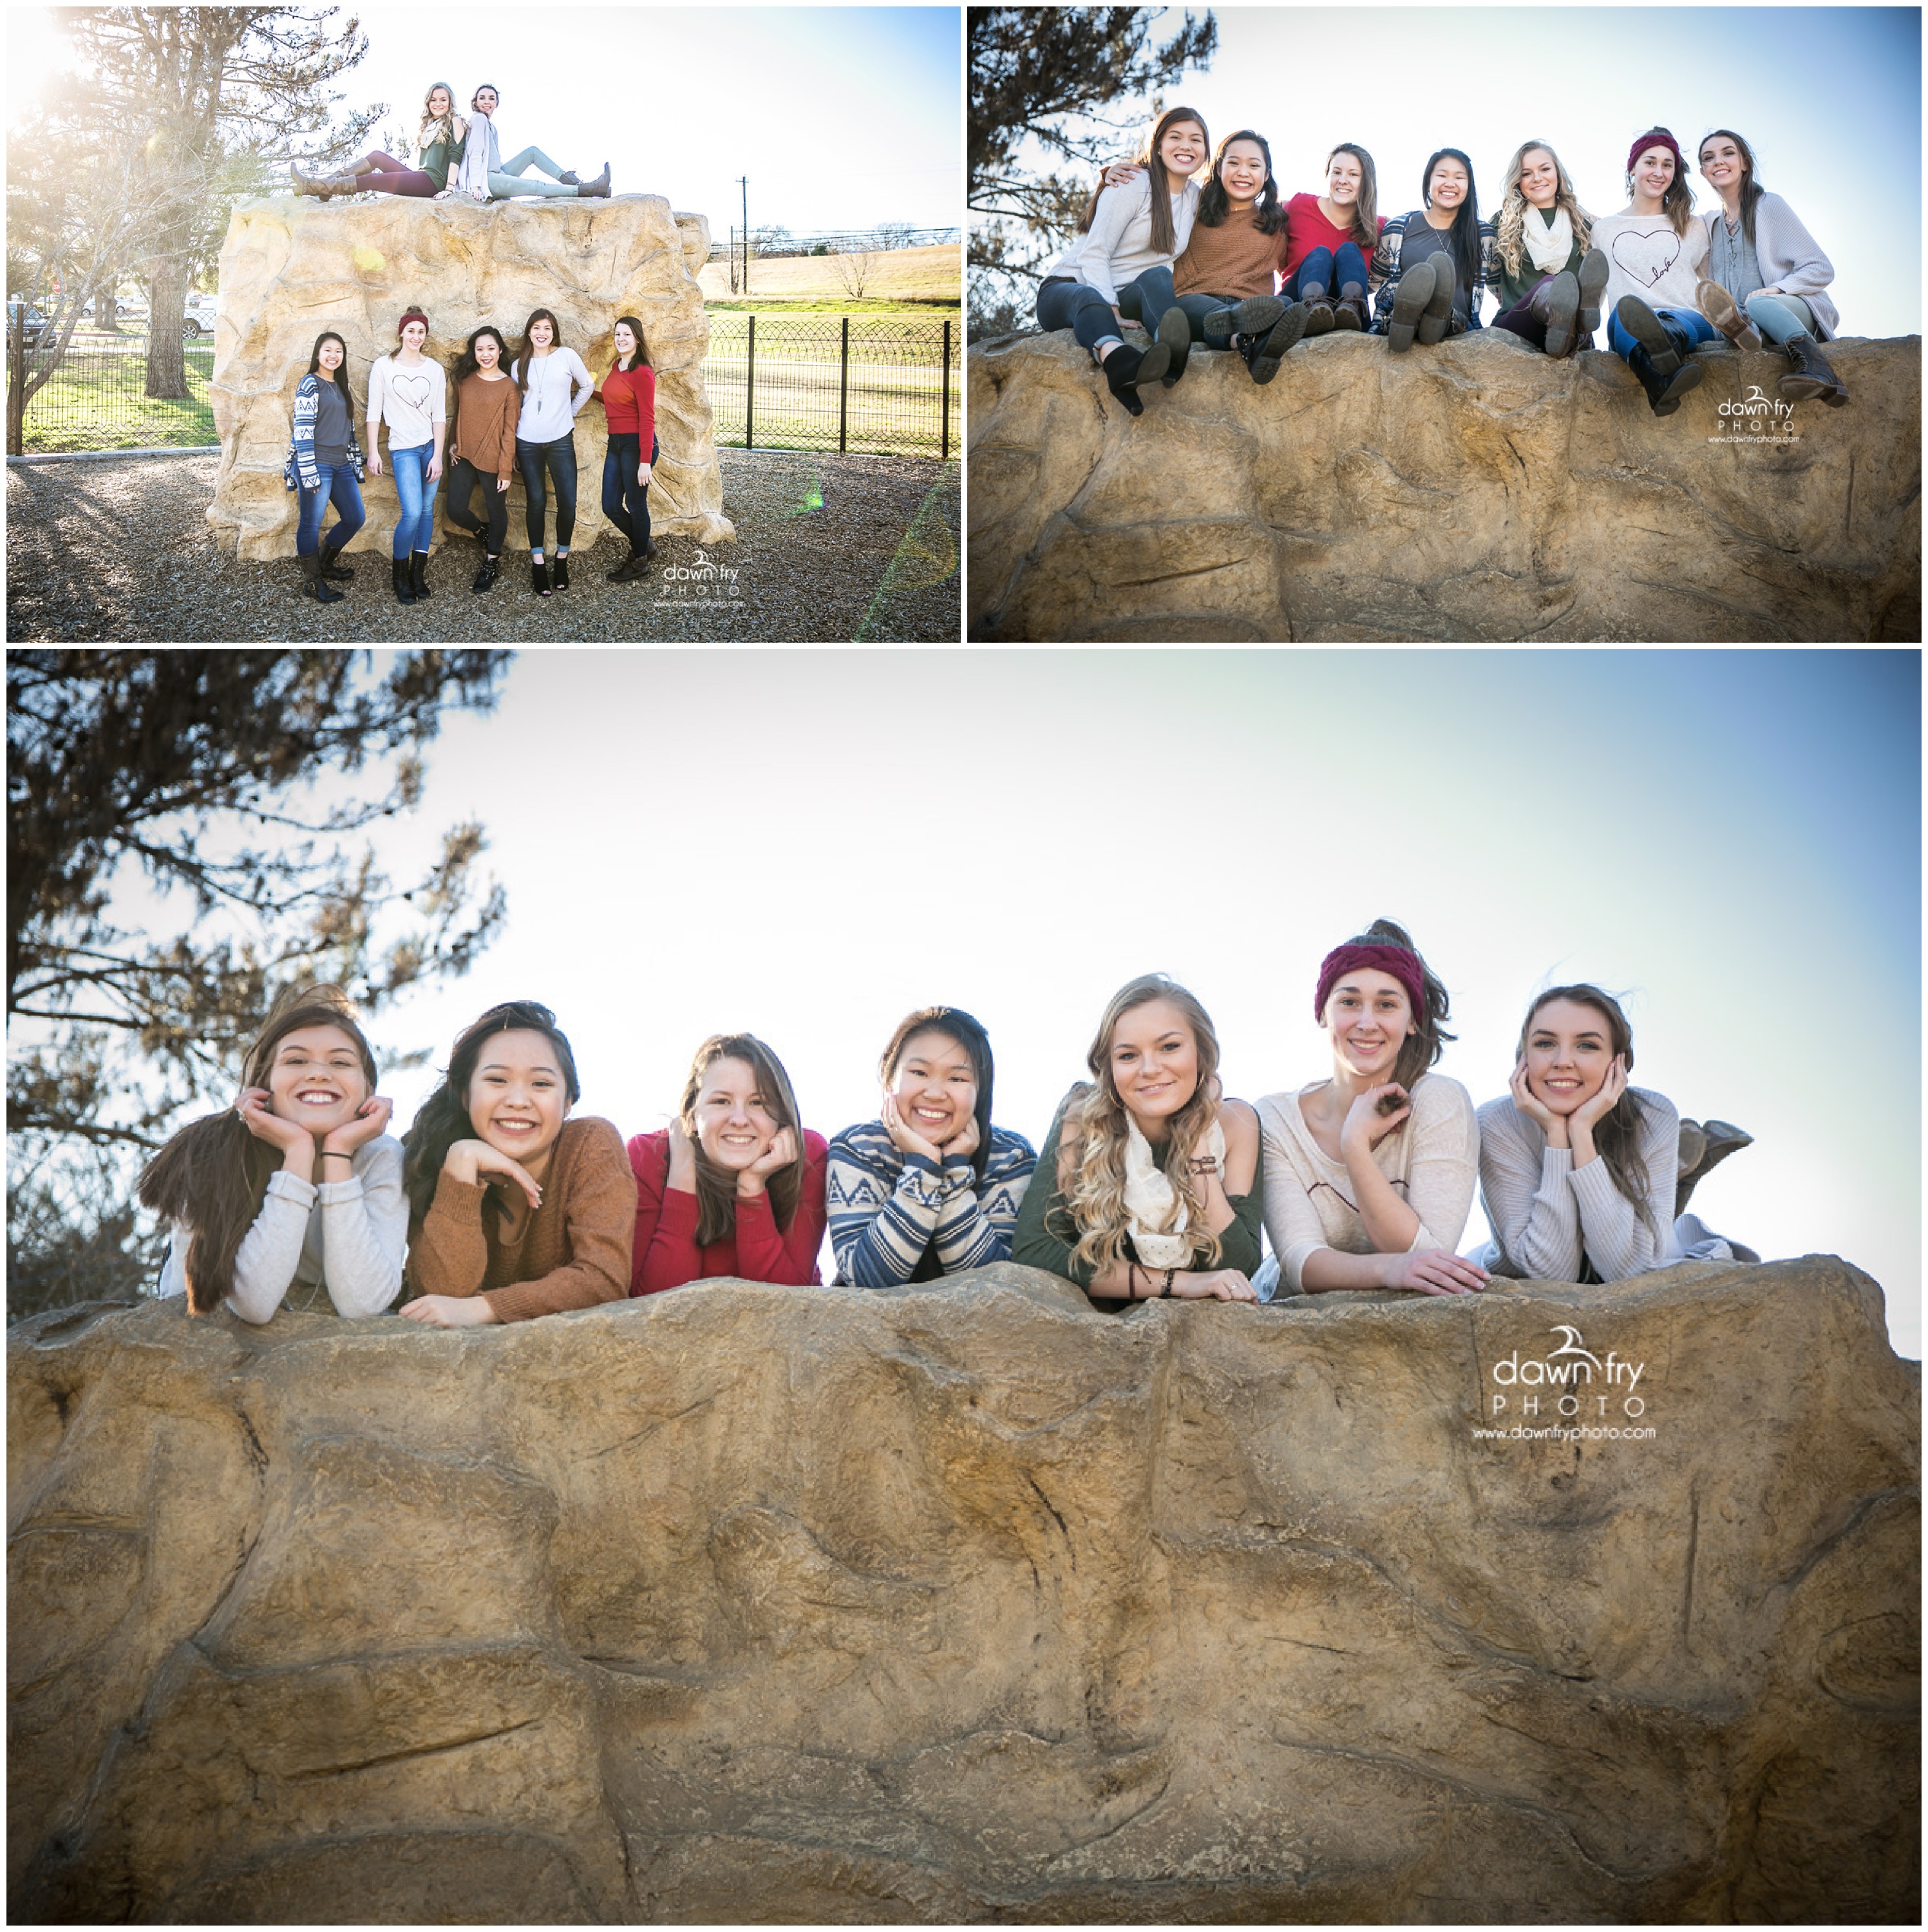 A Day At the Park with the DFP Spokesmodels | Dawn Fry Photo | Austin Photographer